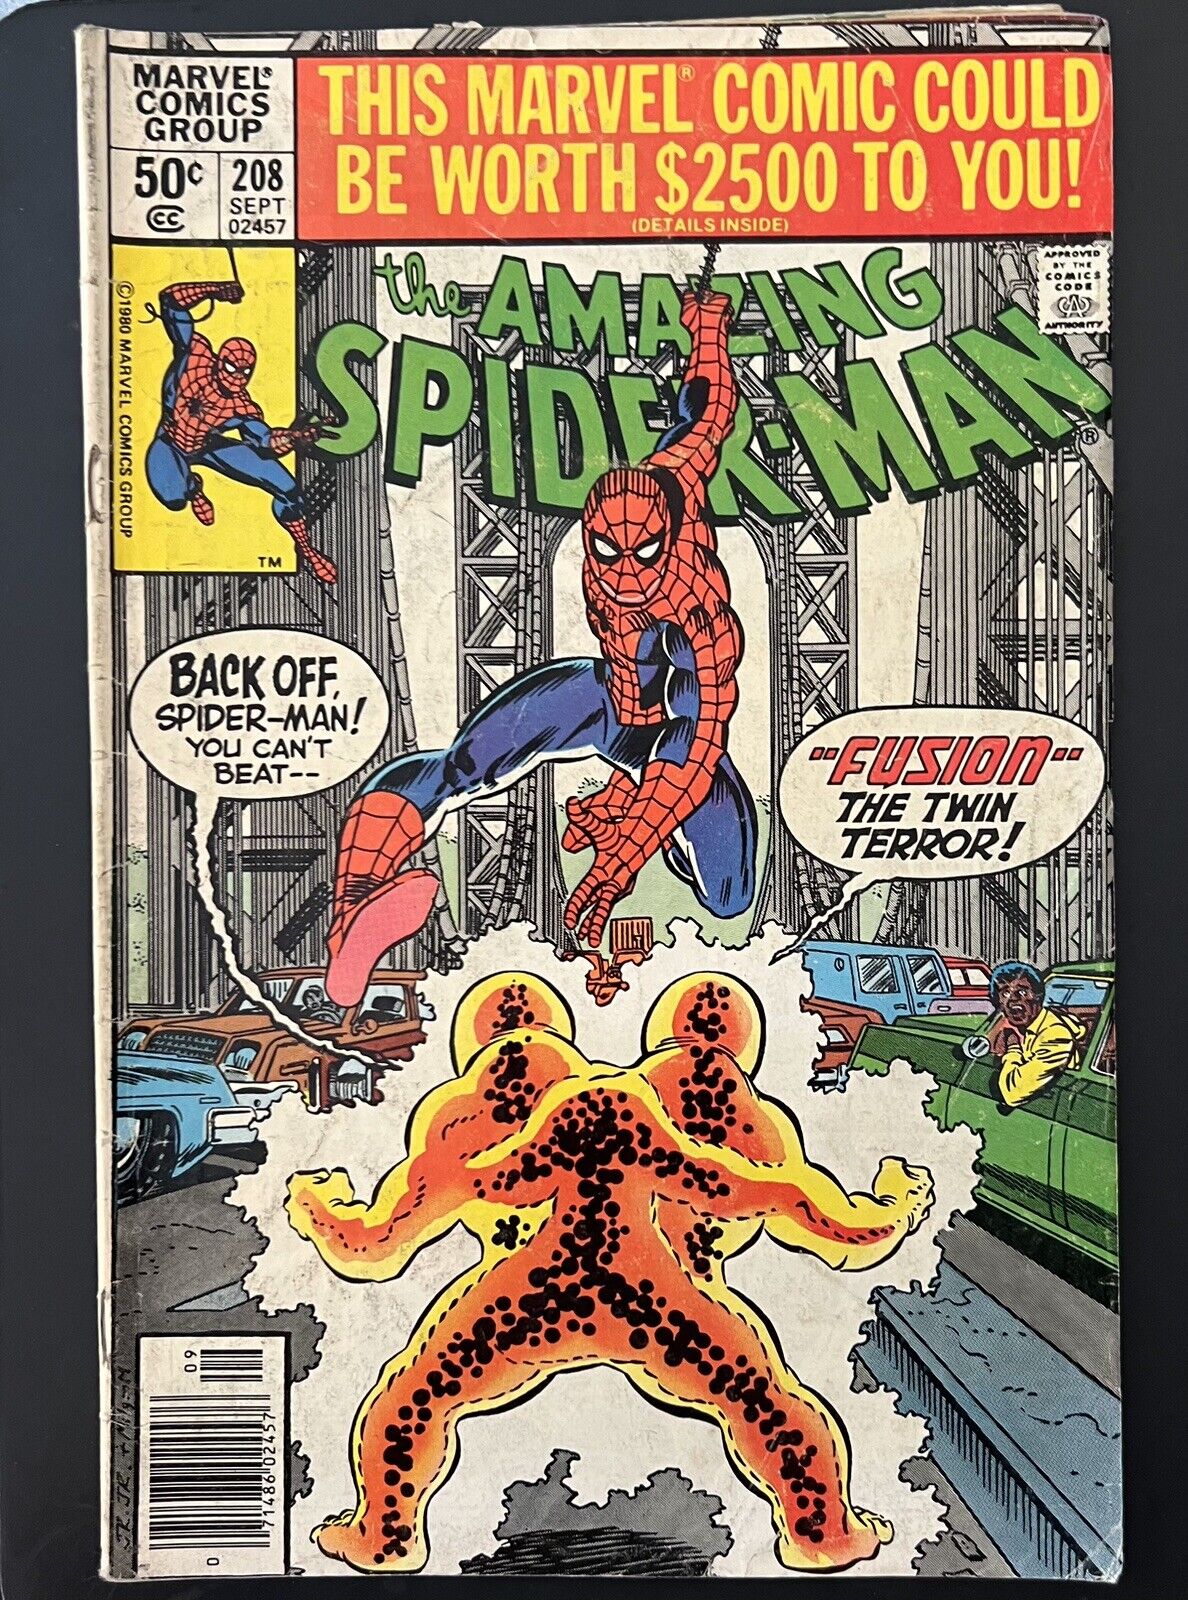 THE AMAZING SPIDER-MAN #208 COMIC BOOK (MARVEL,1980) 1ST FUSION